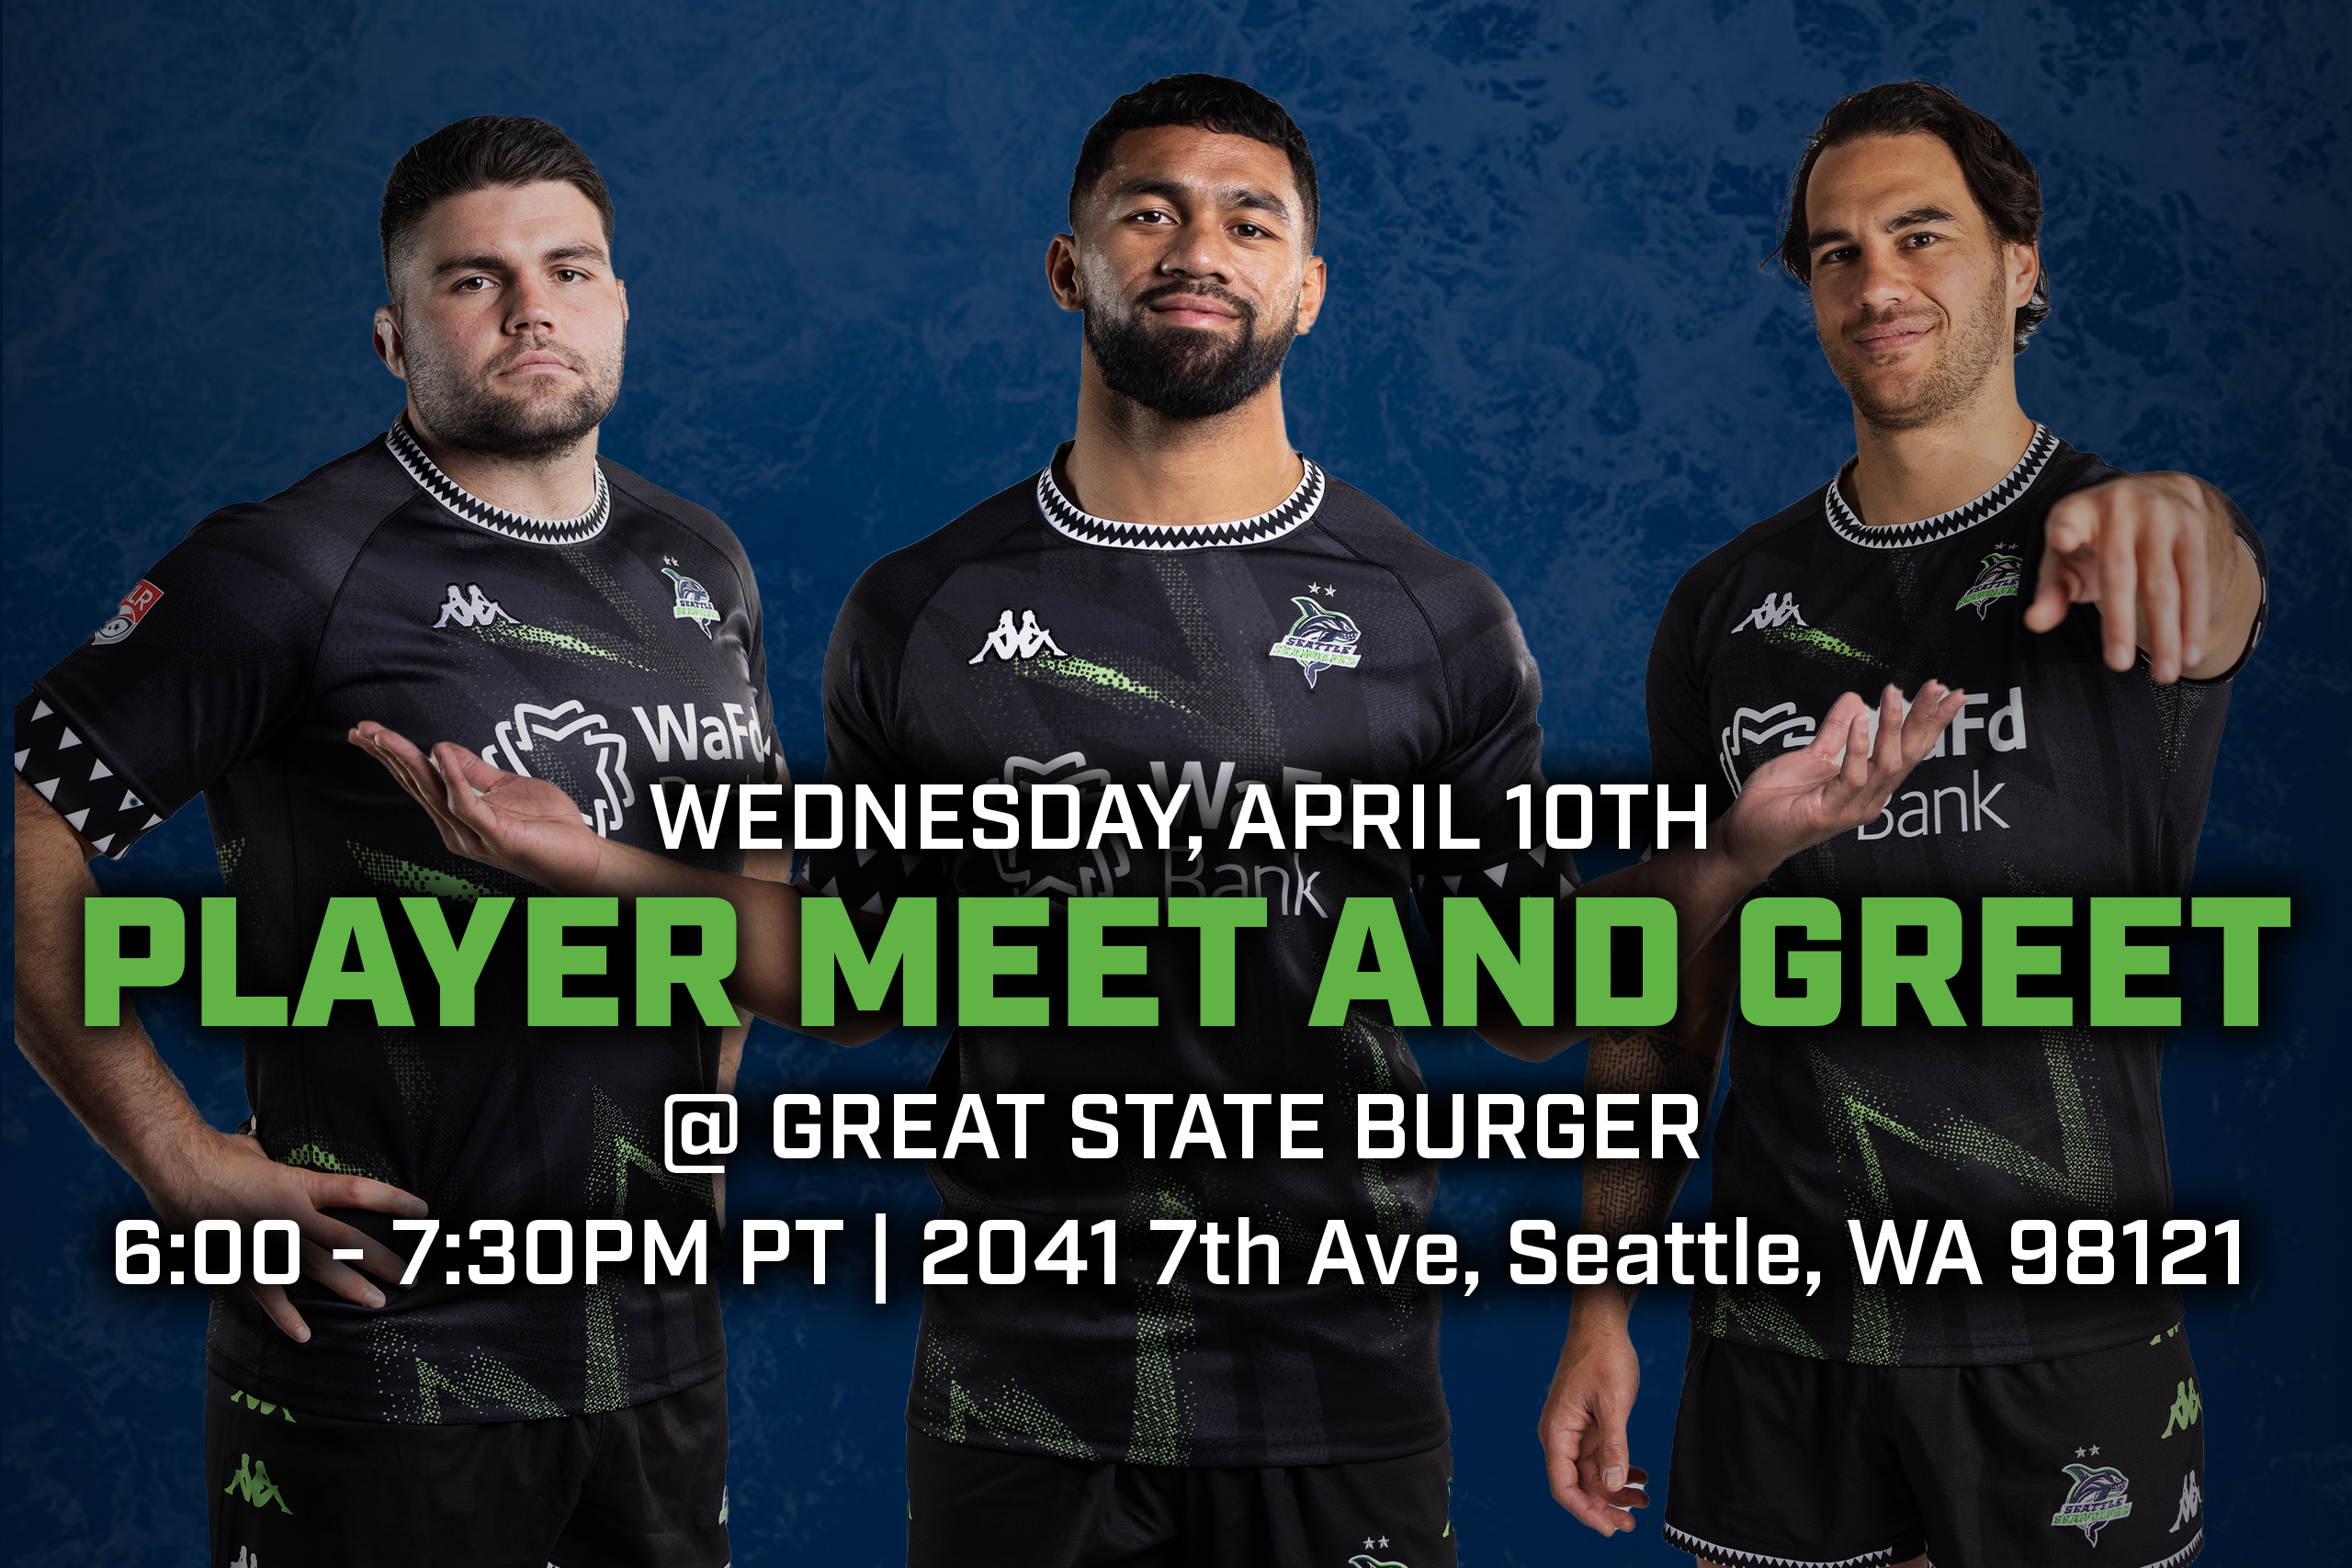 Seattle Seawolves Player Meet and Greet at Great State Burger, April 10th